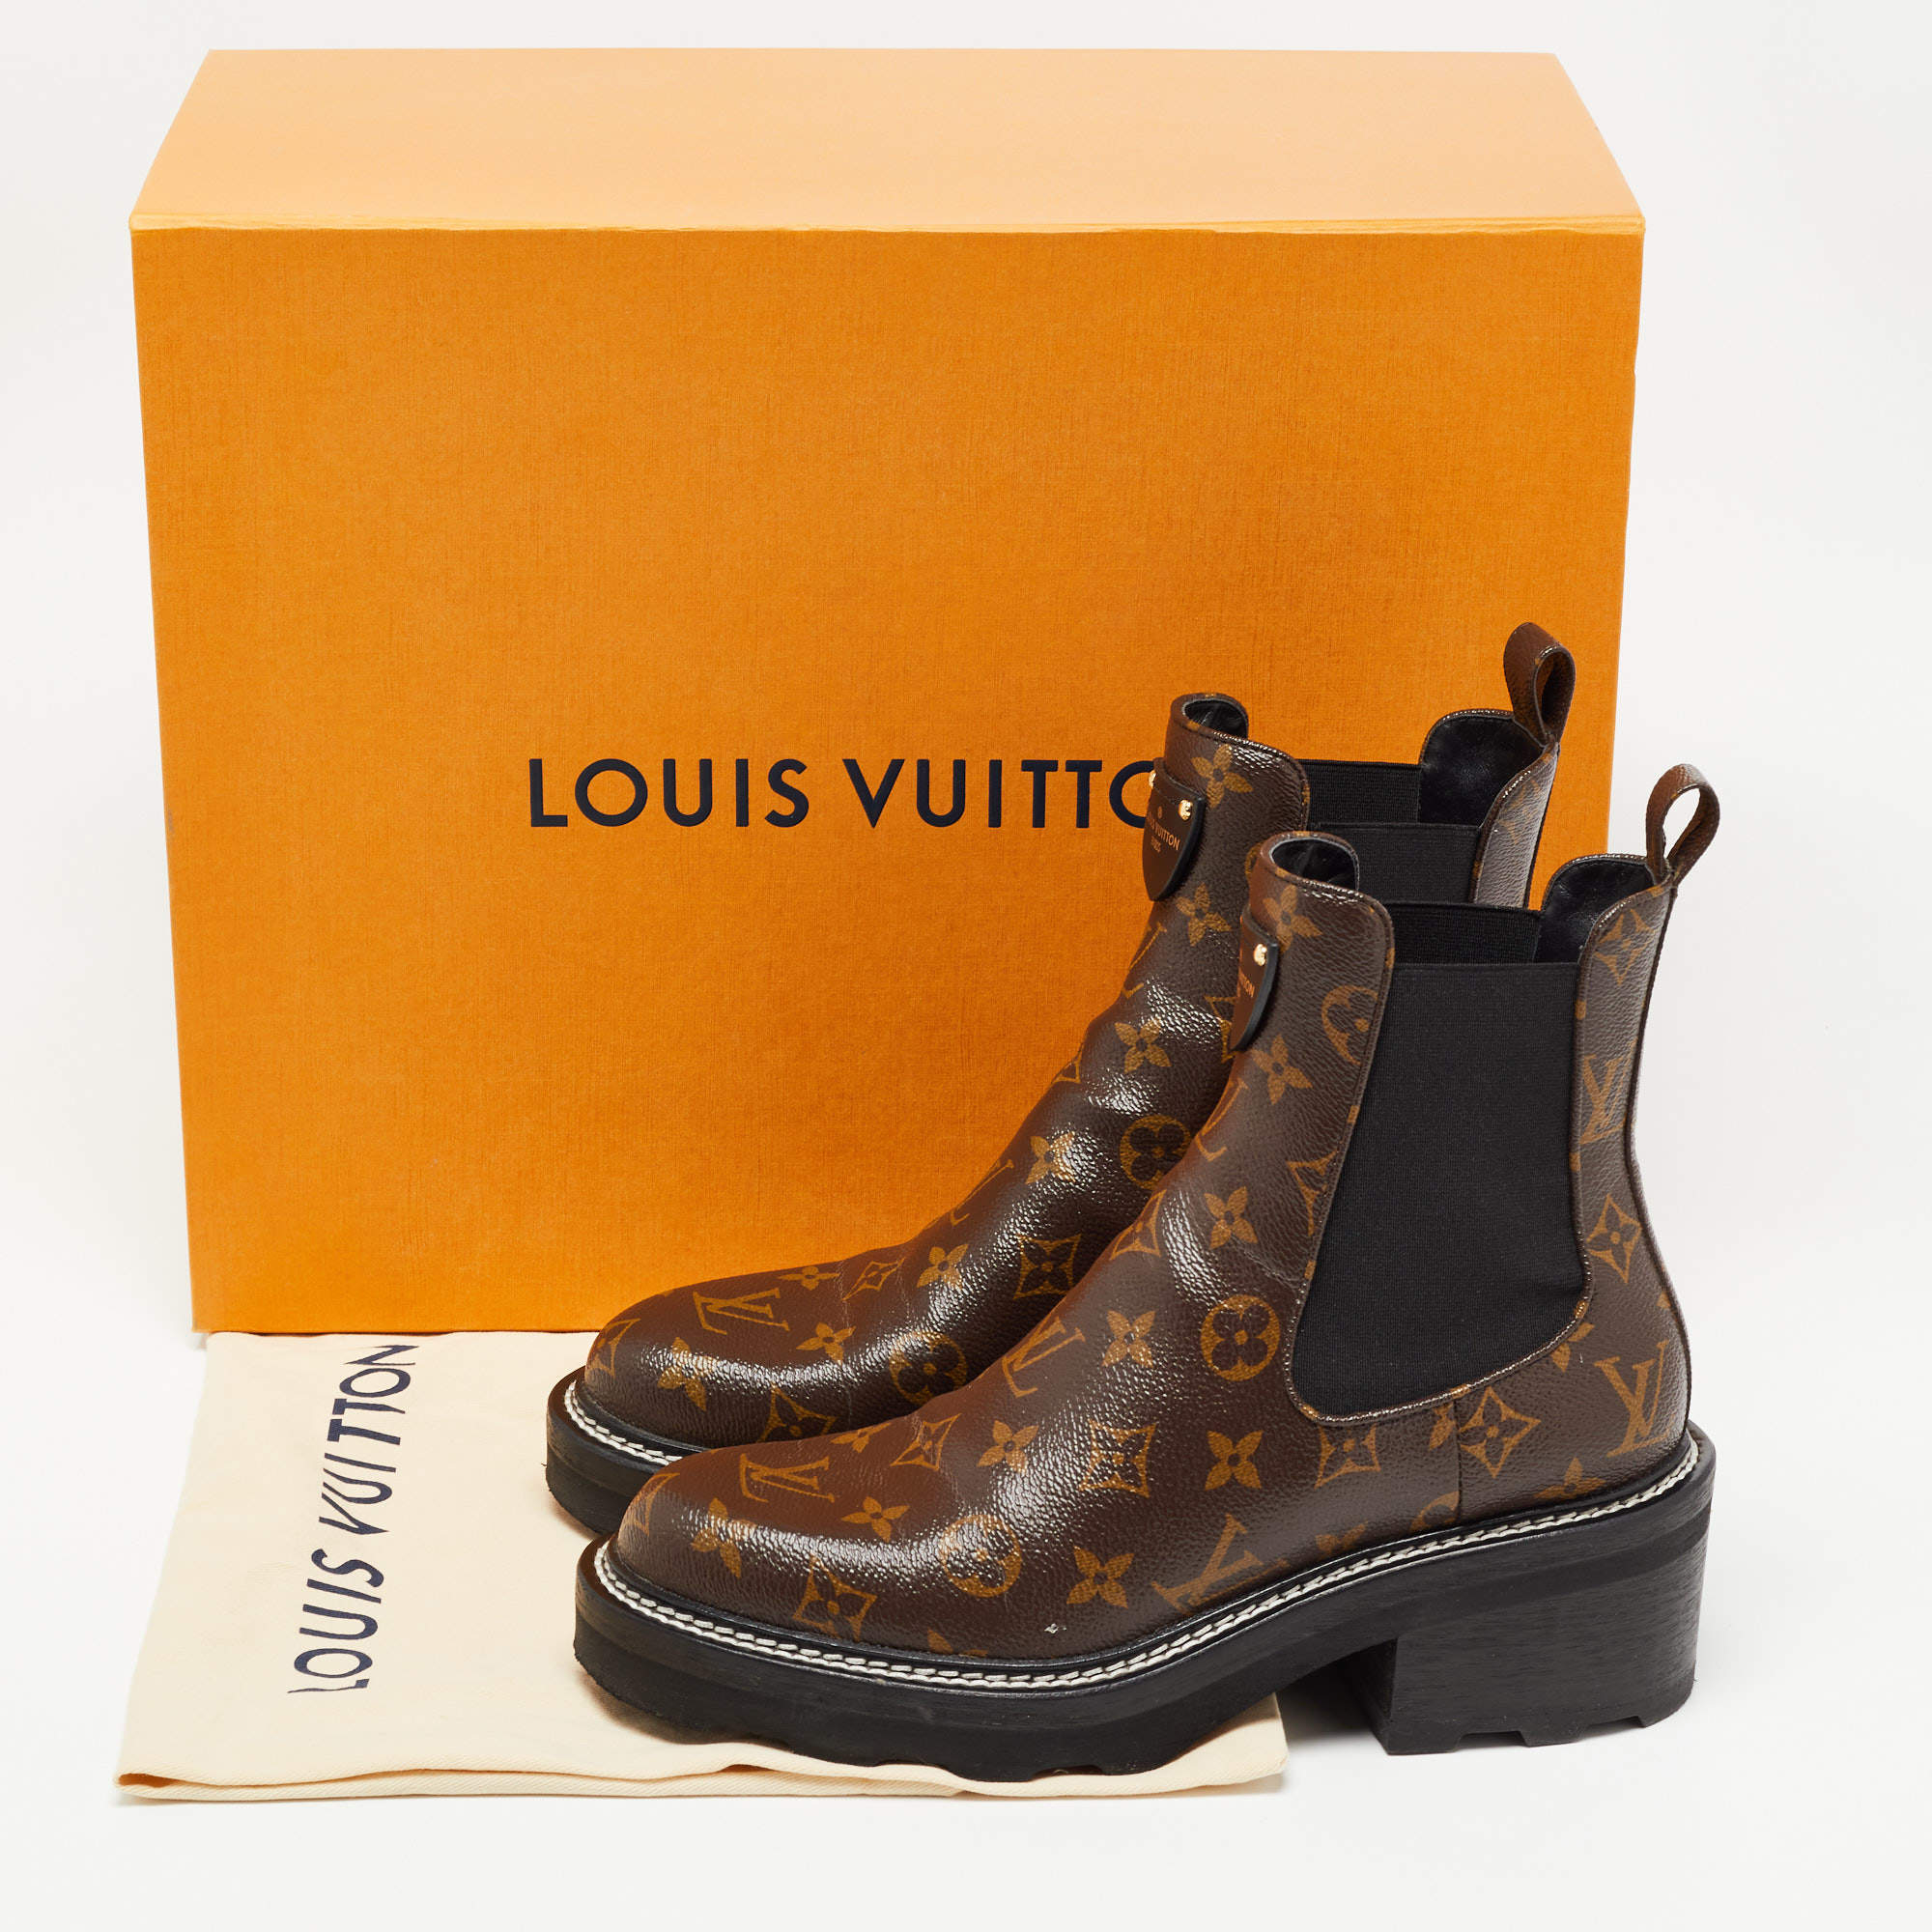 Lv Beaubourg Ankle Boot - Women - Shoes